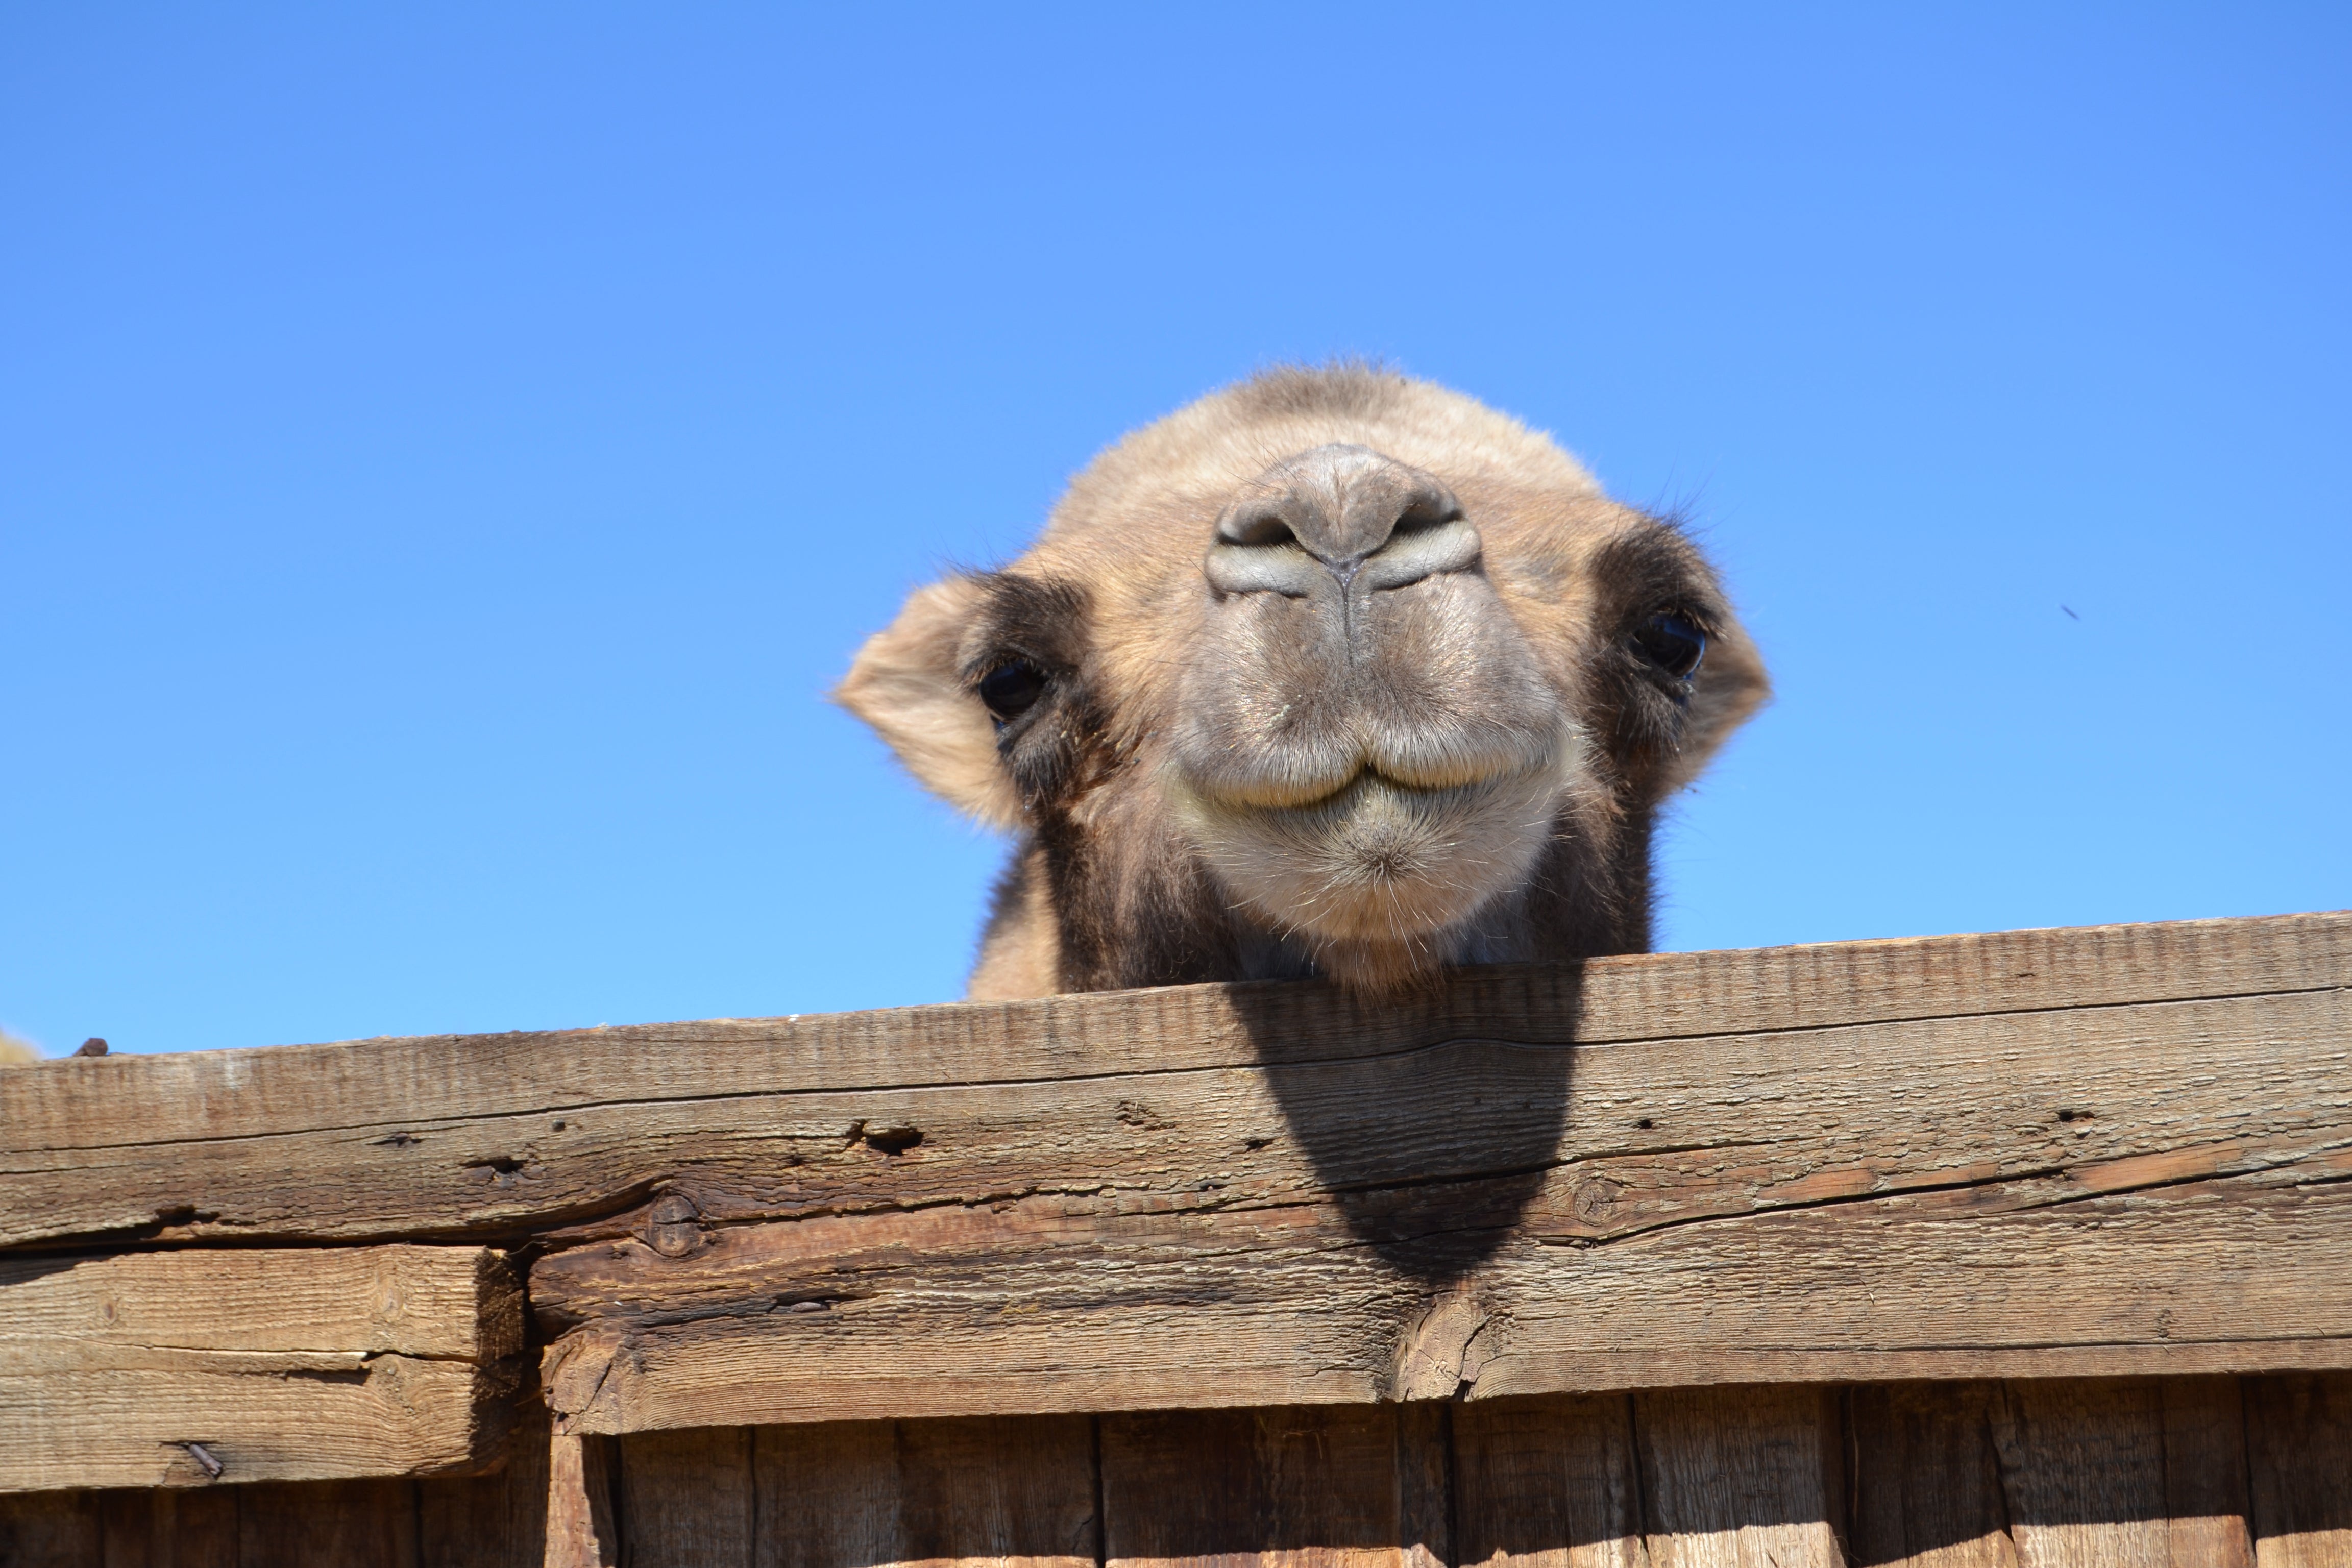 Thats not my name confusing wild and Bactrian camels masks extinction risk The Independent pic